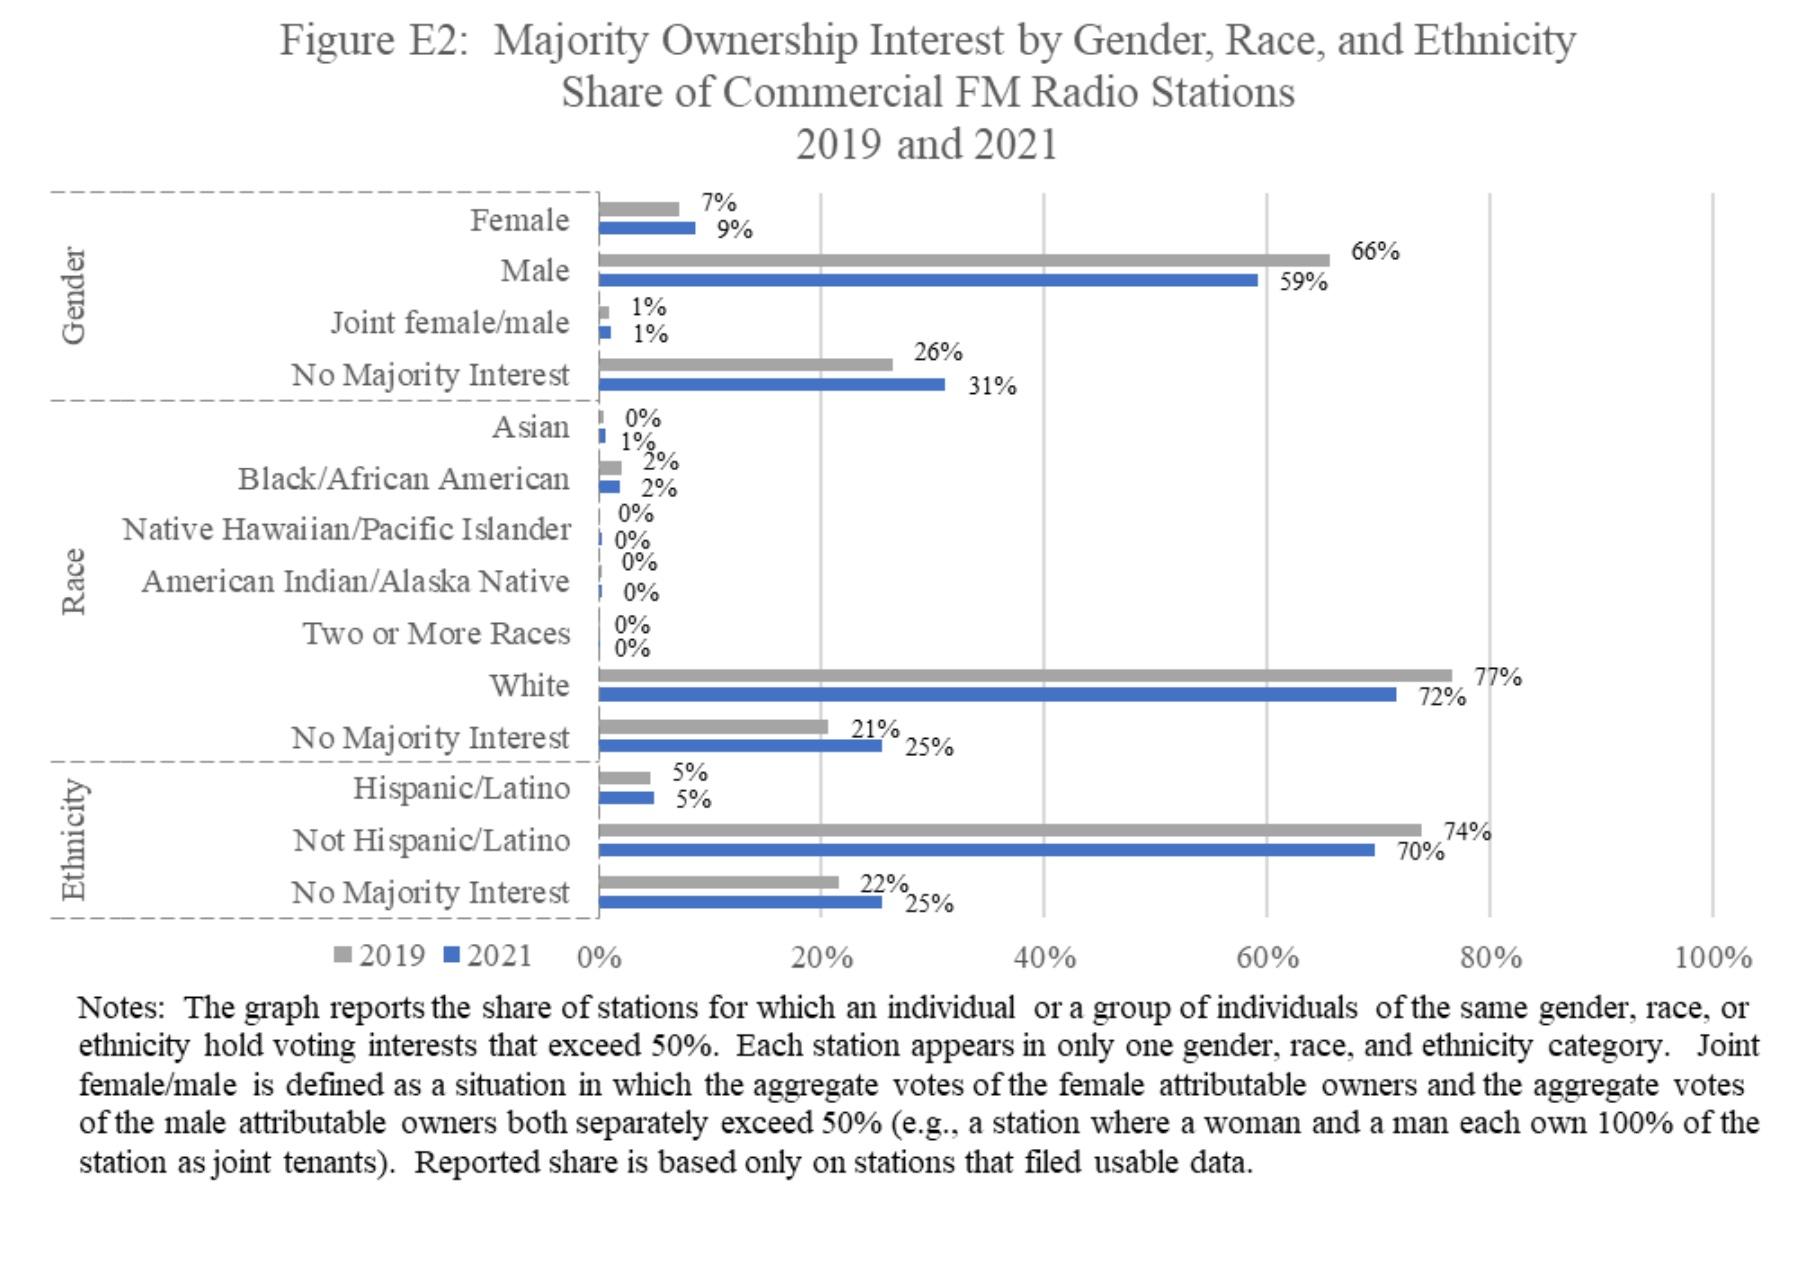 Majority Ownership Interest by Gender, Race, and Ethnicity Share of Commercial FM Radio Stations